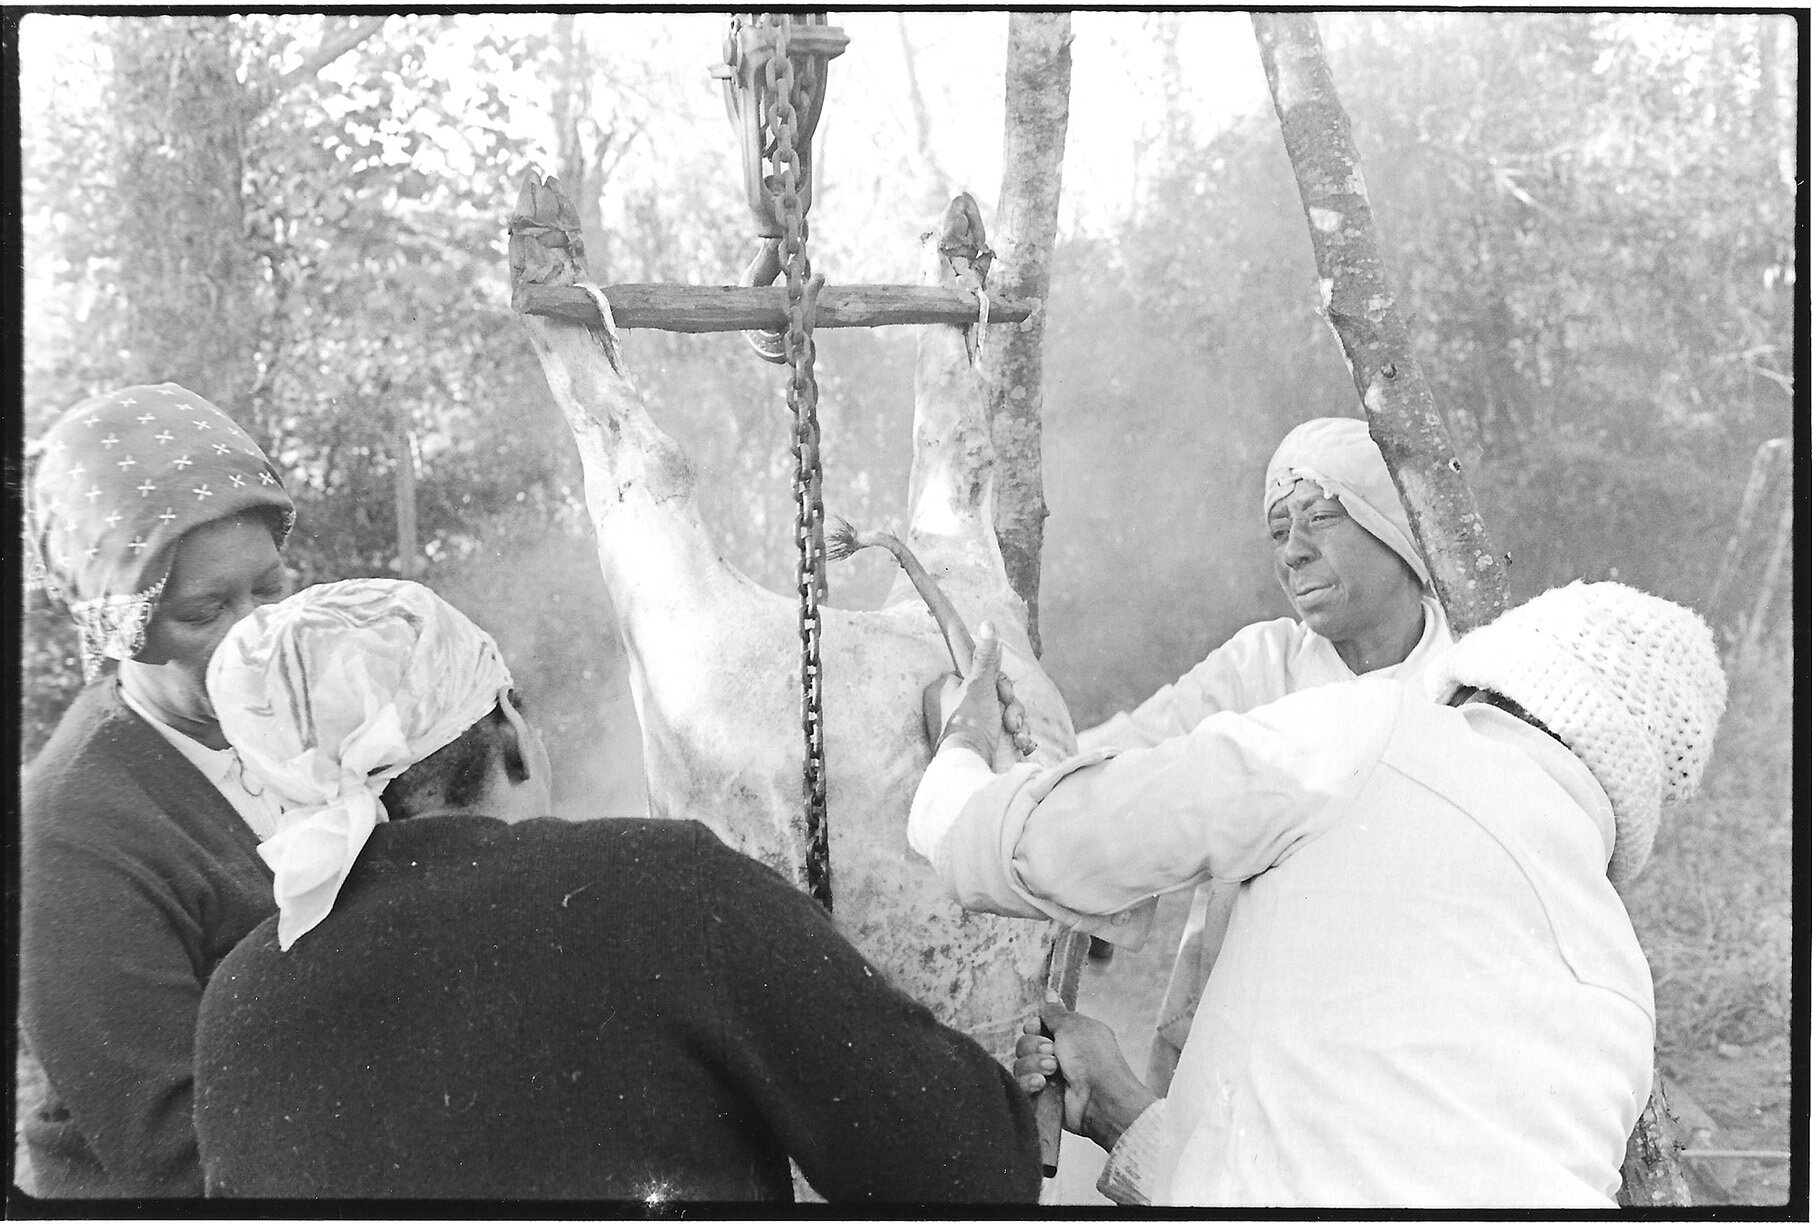   Cleaning the Hog at Eunice and Eddie's Place, Climax, GA  Image: 1977/printed: 2020 Gelatin silver print 6 1⁄2 x 9 3⁄4 in. (image size) The Do Good Fund, Inc., 2020-062 